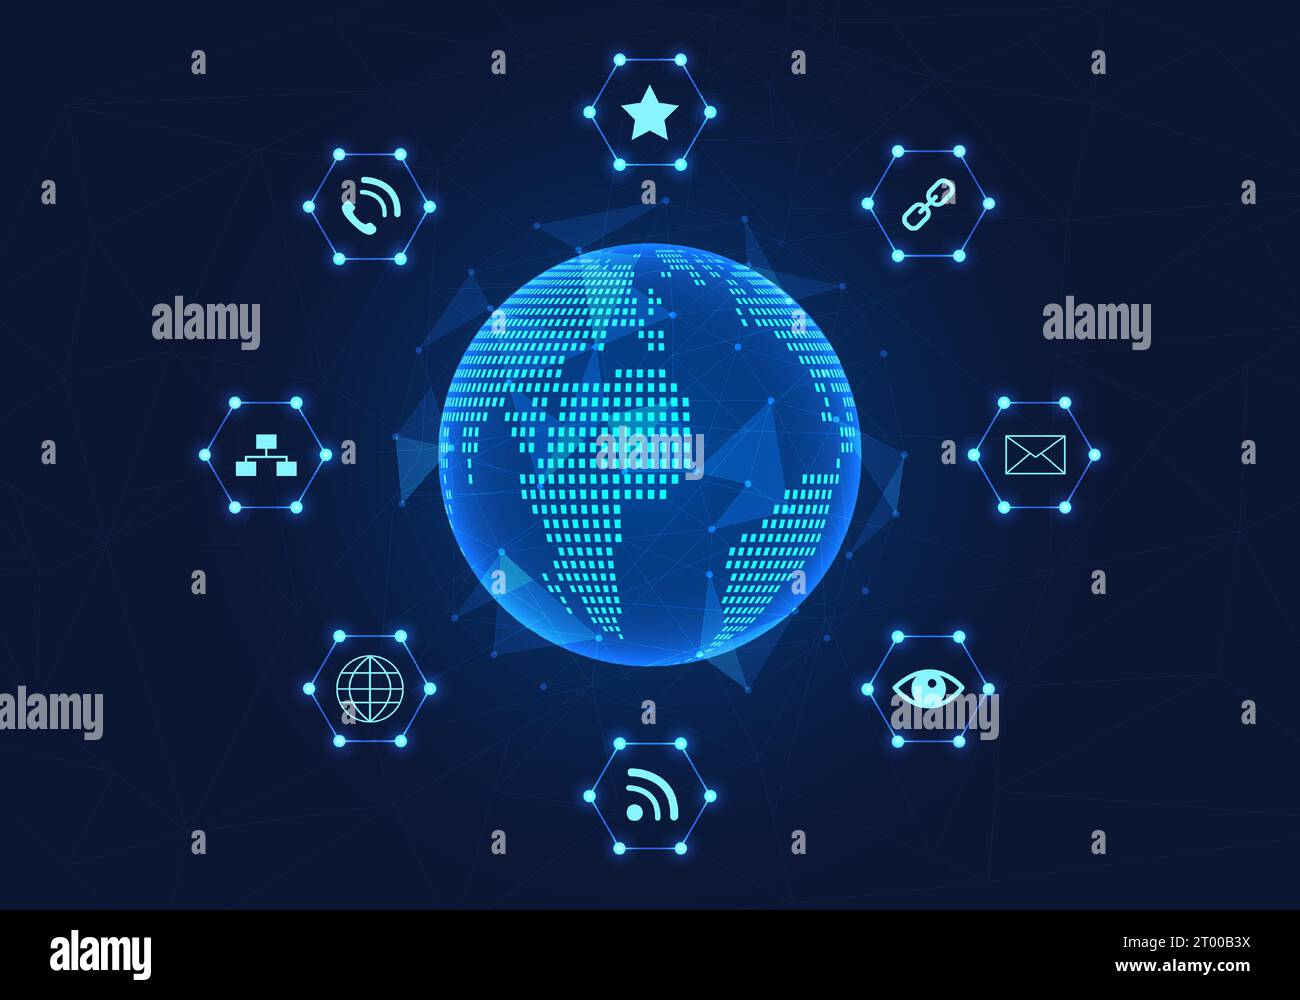 Global technology network that connects with smart technology to provide quick access to information anywhere for expanding business globally. Stock Vector